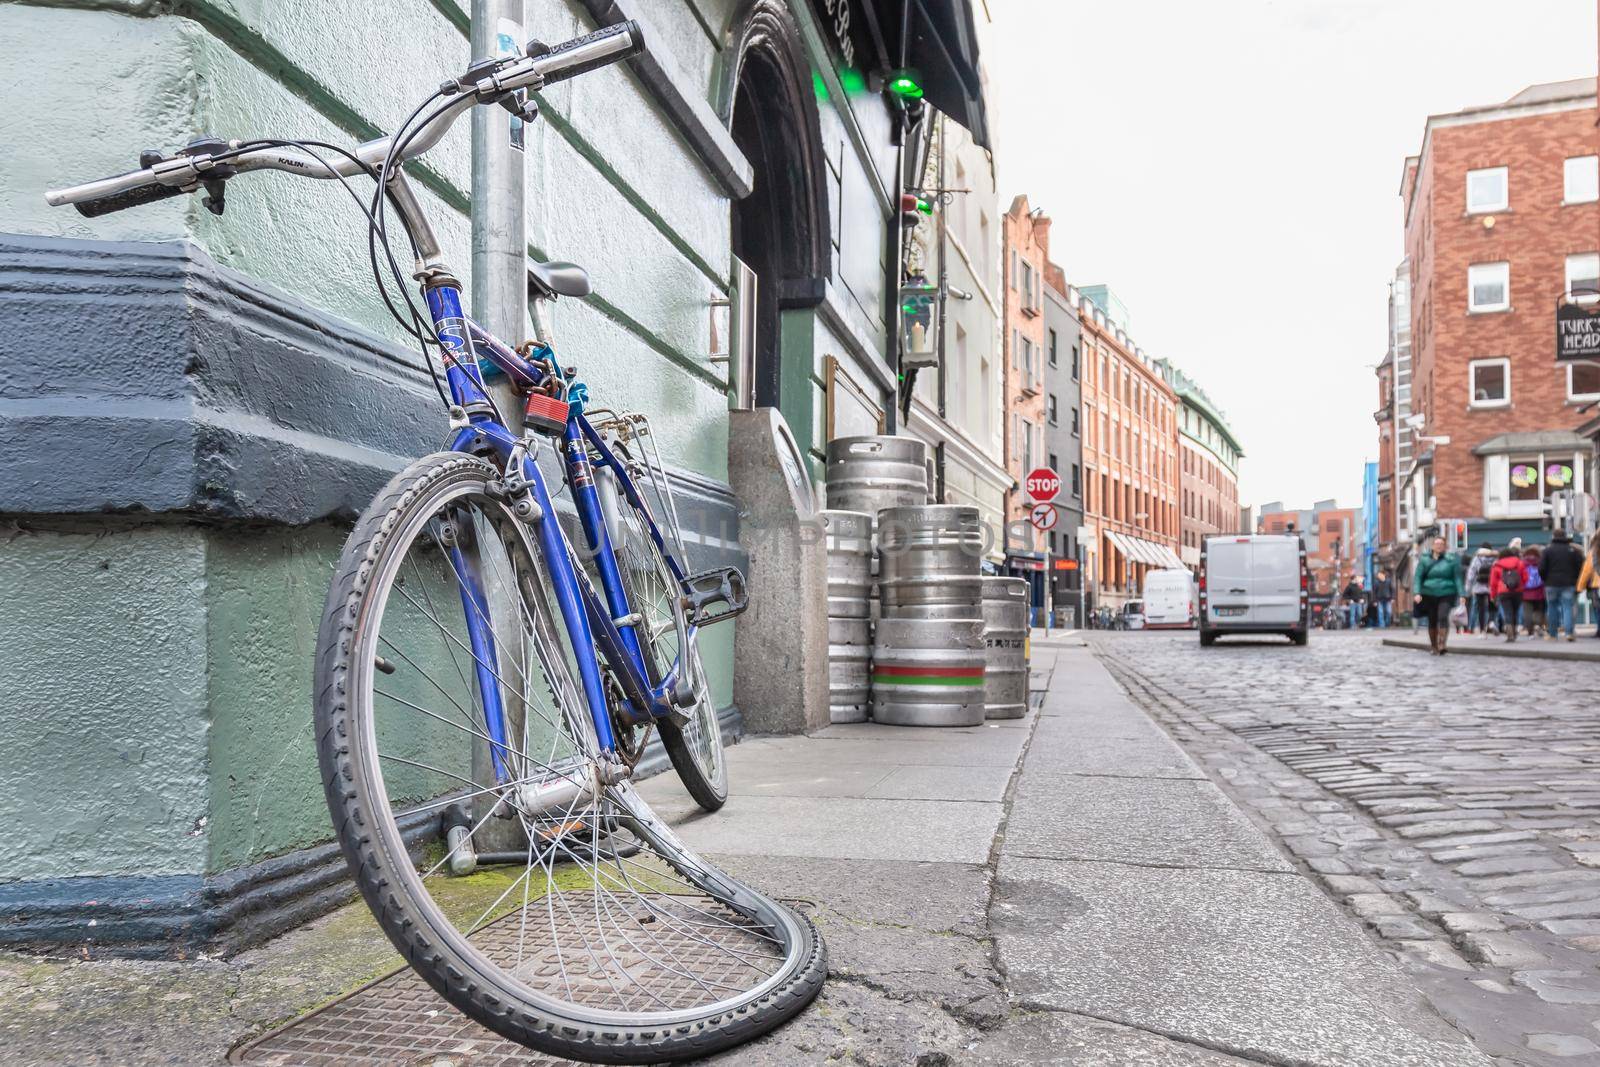 Vandalized bicycle tied up in Dublin, Ireland by AtlanticEUROSTOXX